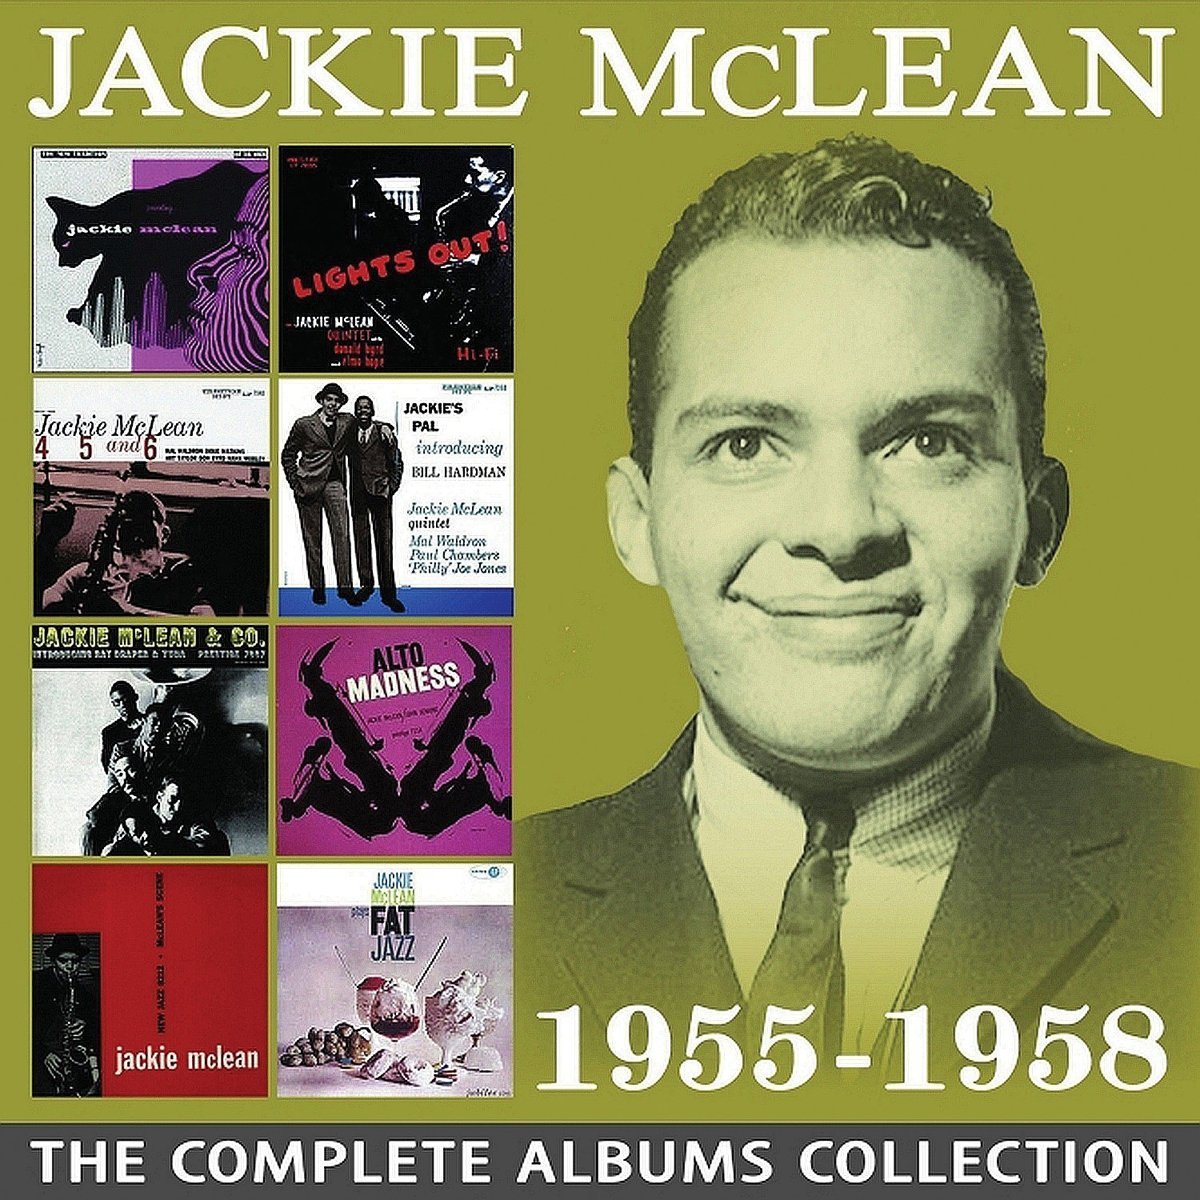 JACKIE MCLEAN - The Complete Albums Collection 1955-1958 cover 